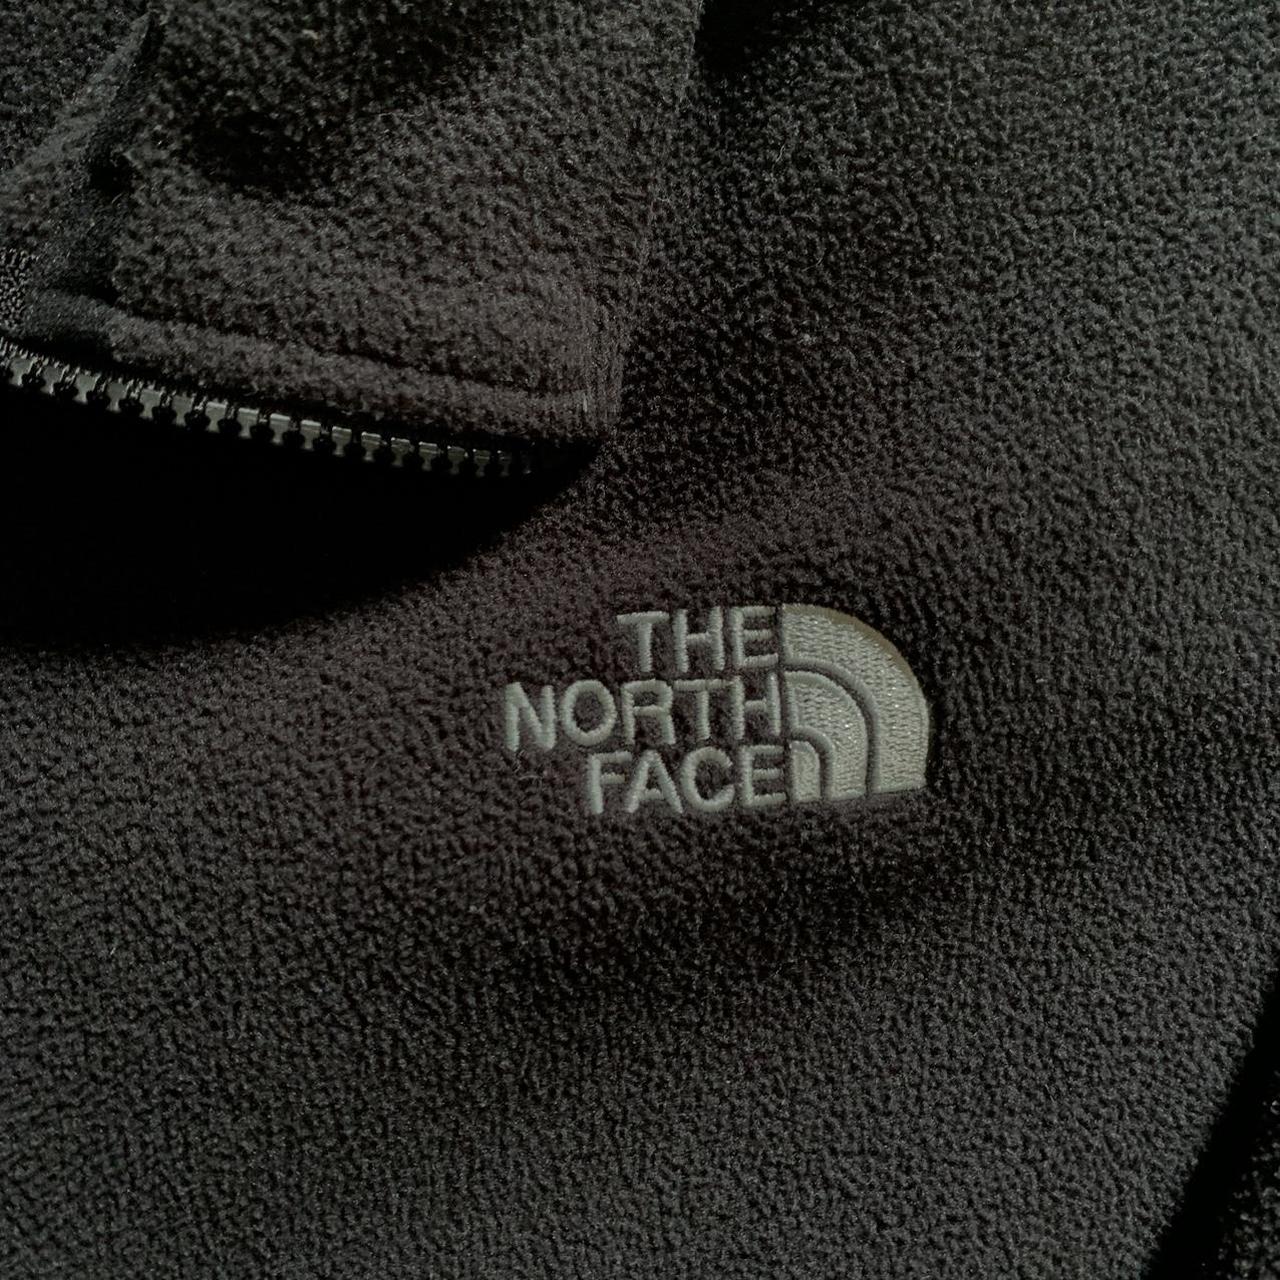 The North Face Men's Jacket (2)